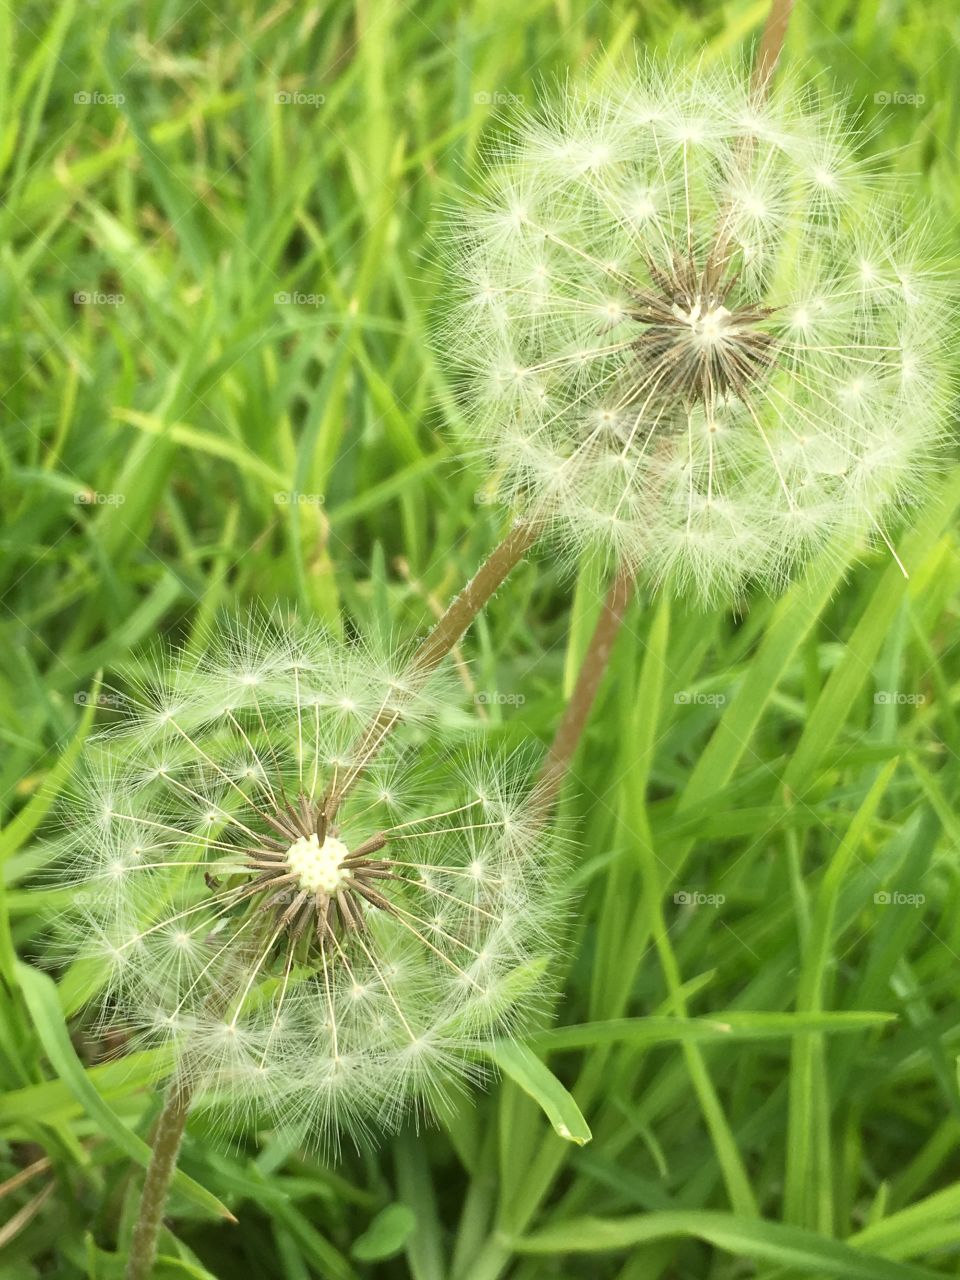 Seeding dandelion heads flowers growing in bright green grass outdoors suitable as background, wallpaper 